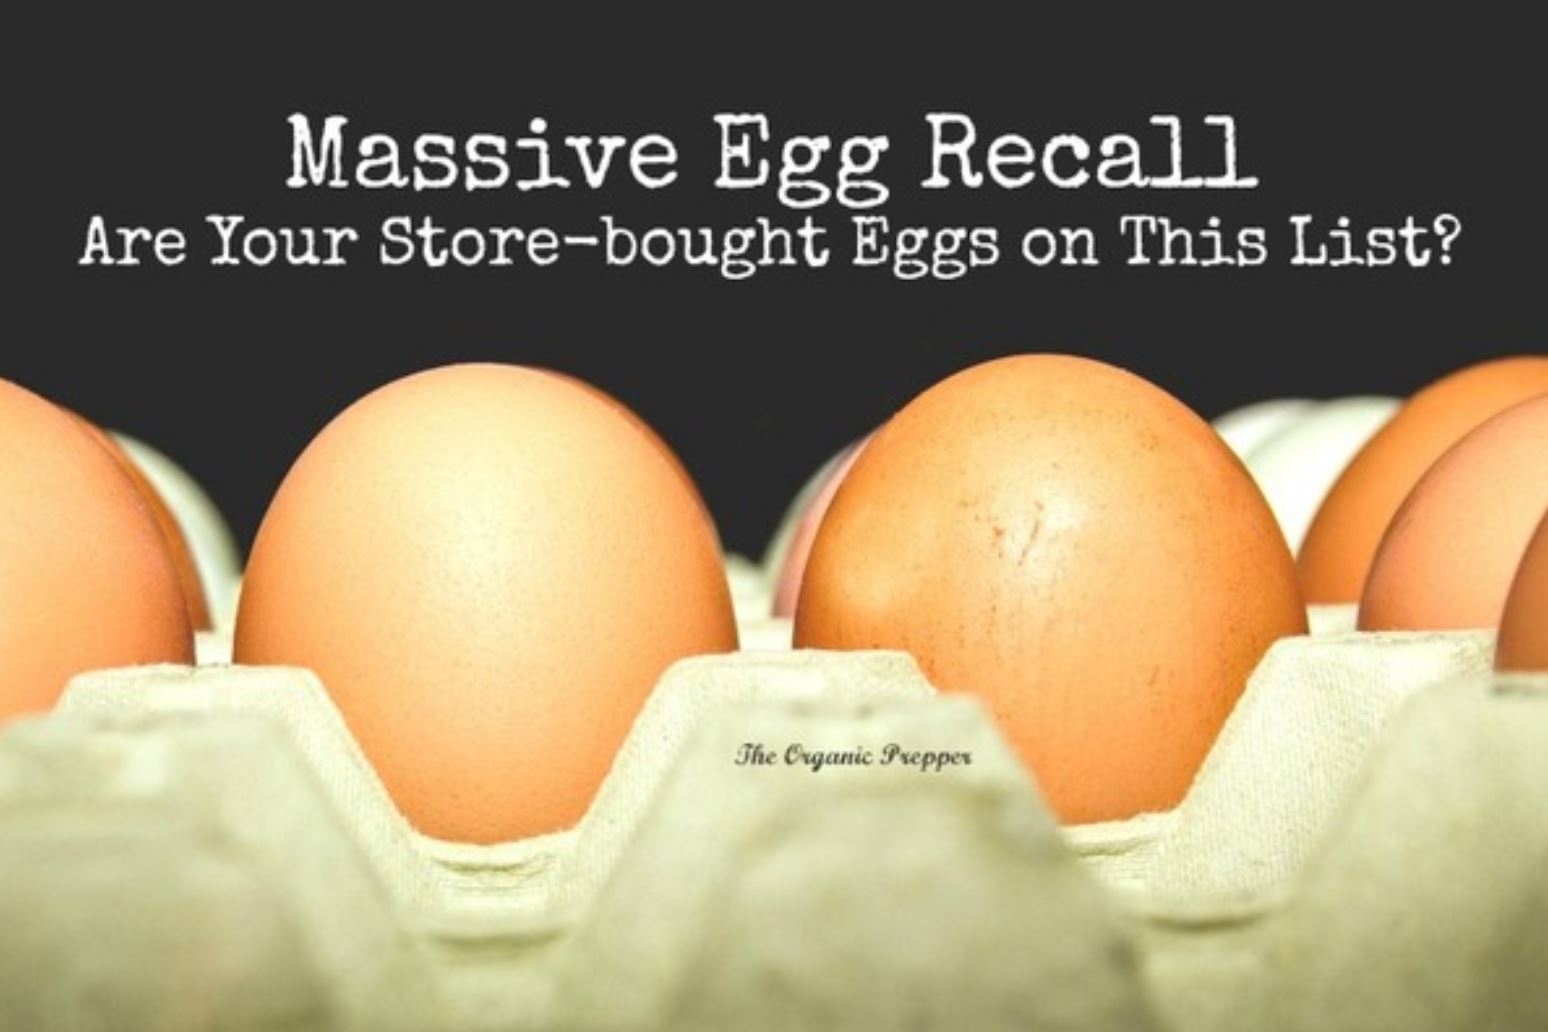 Massive Egg Recall Are Your Storebought Eggs on This List?